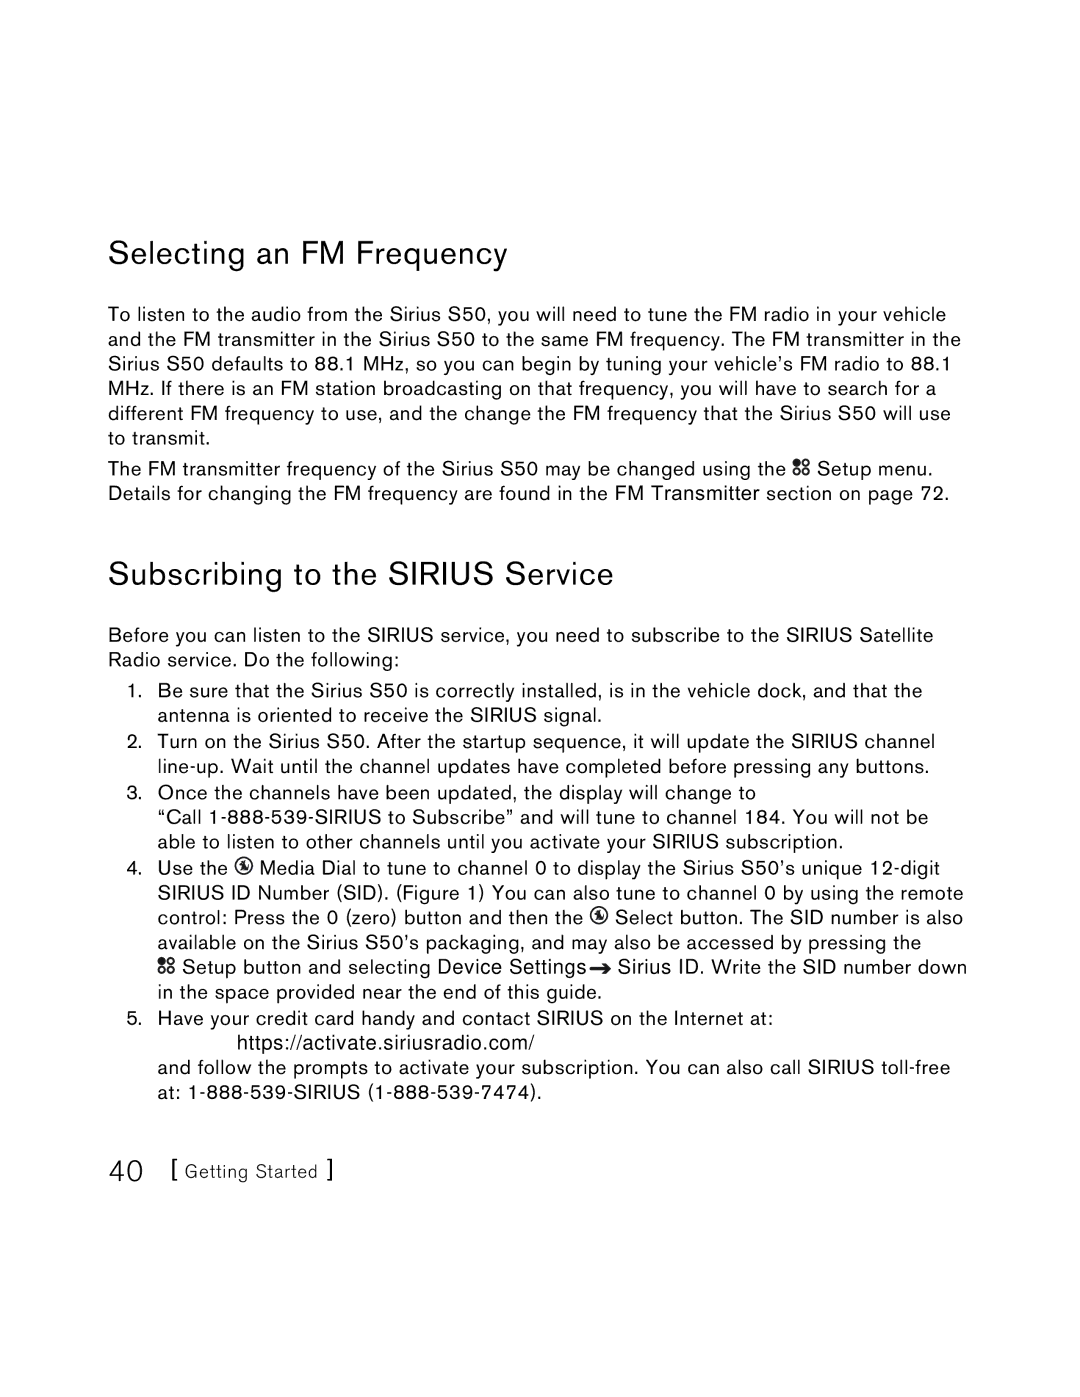 Sirius Satellite Radio S50 user manual Selecting an FM Frequency, Subscribing to the Sirius Service 